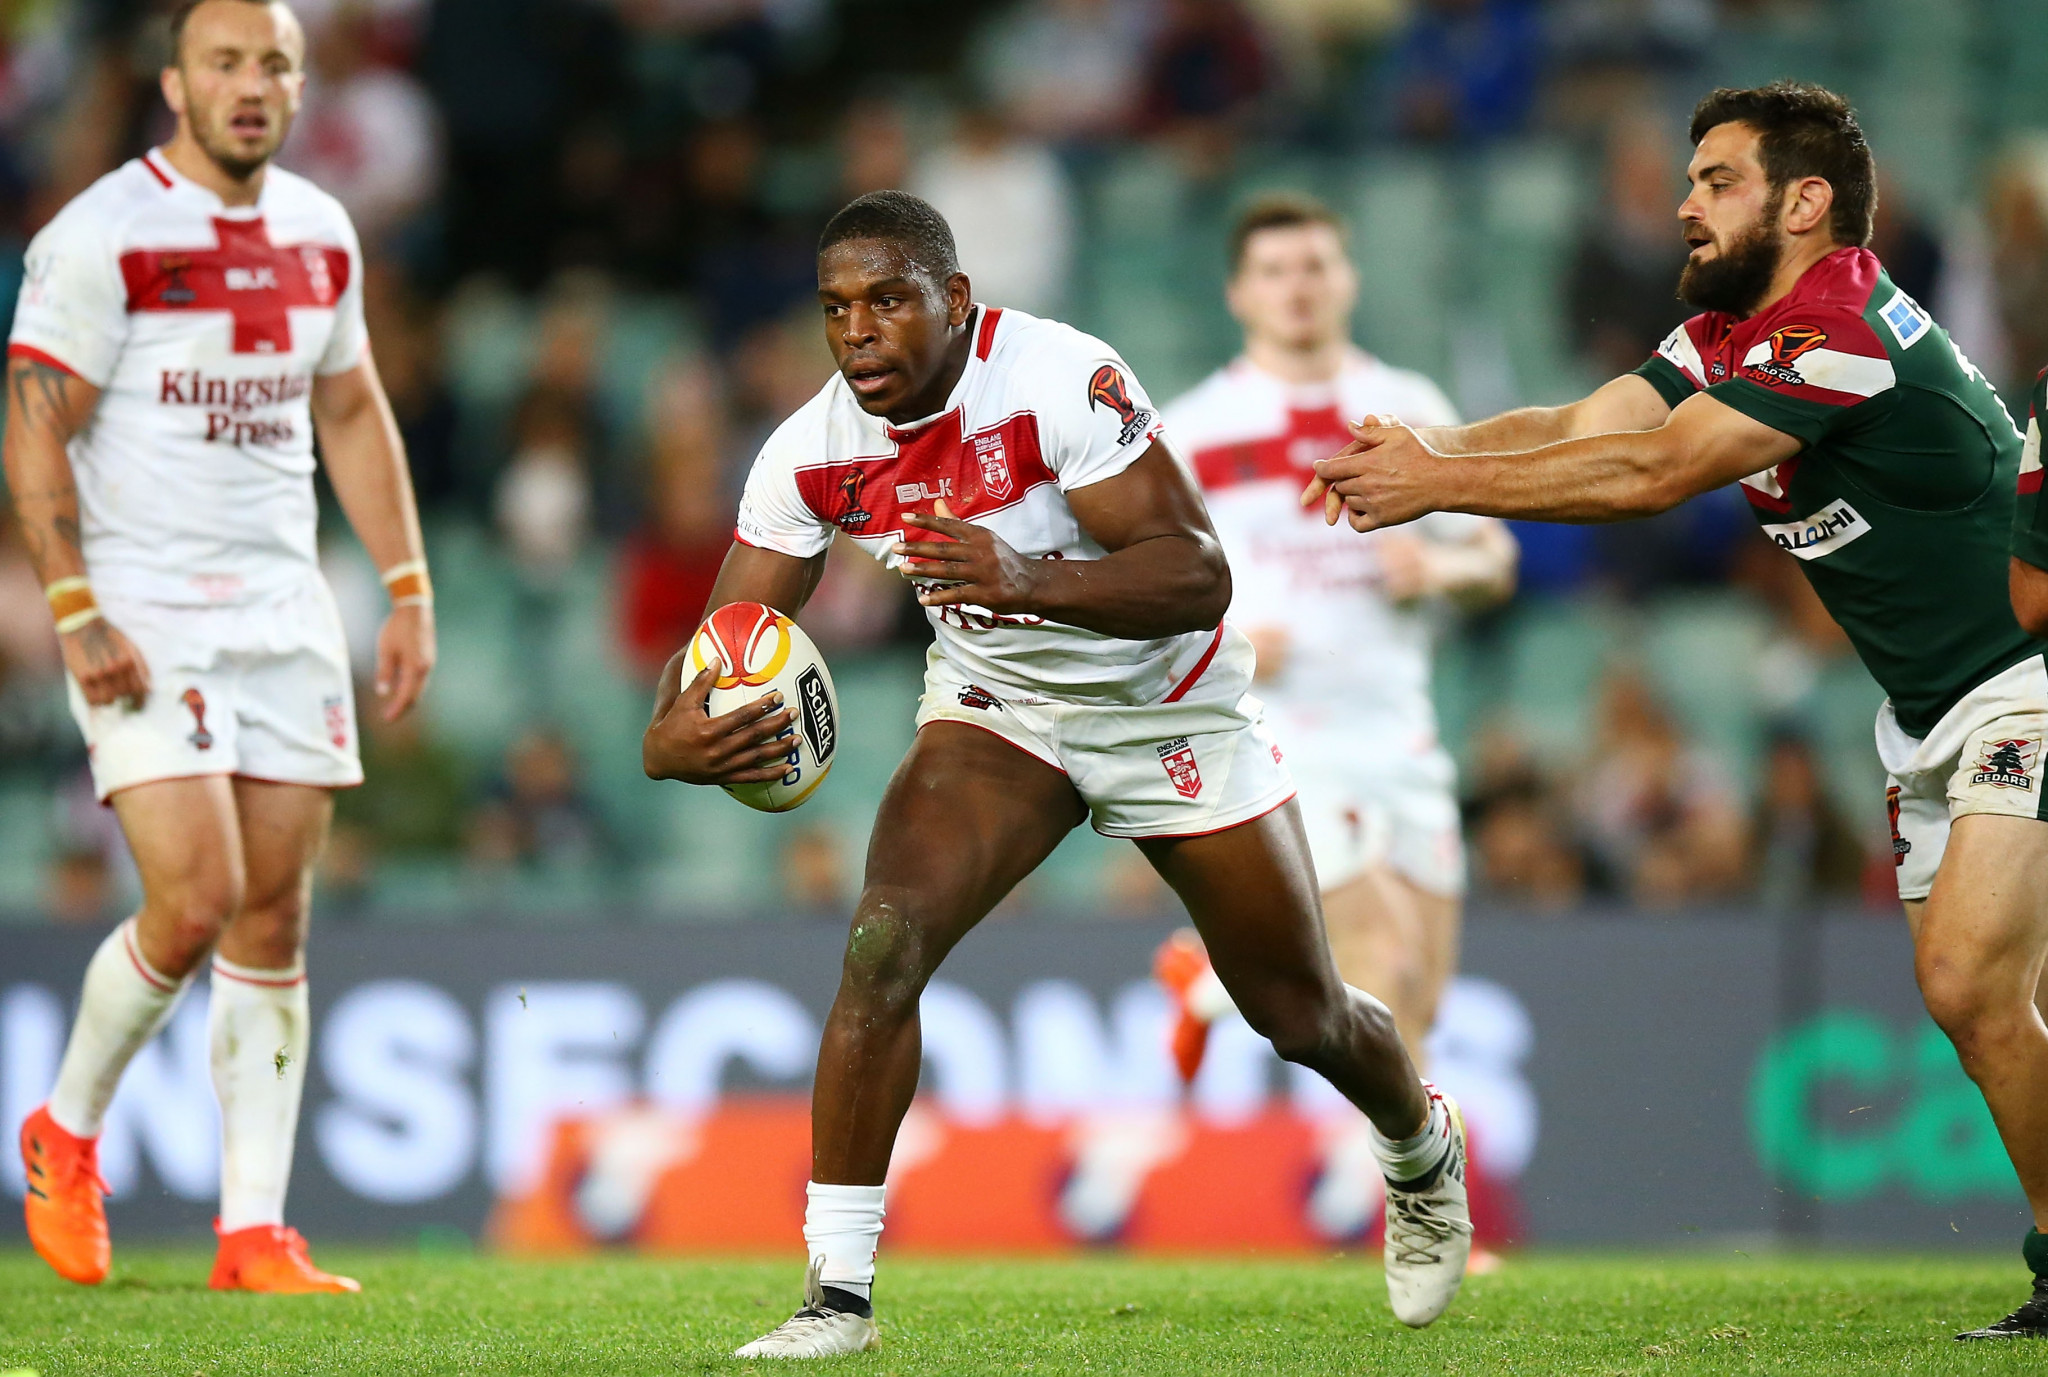  Jermaine McGillvary has been accused of biting by Lebanon's captain Robbie Farah at today's World Cup clash in Sydney ©Getty Images